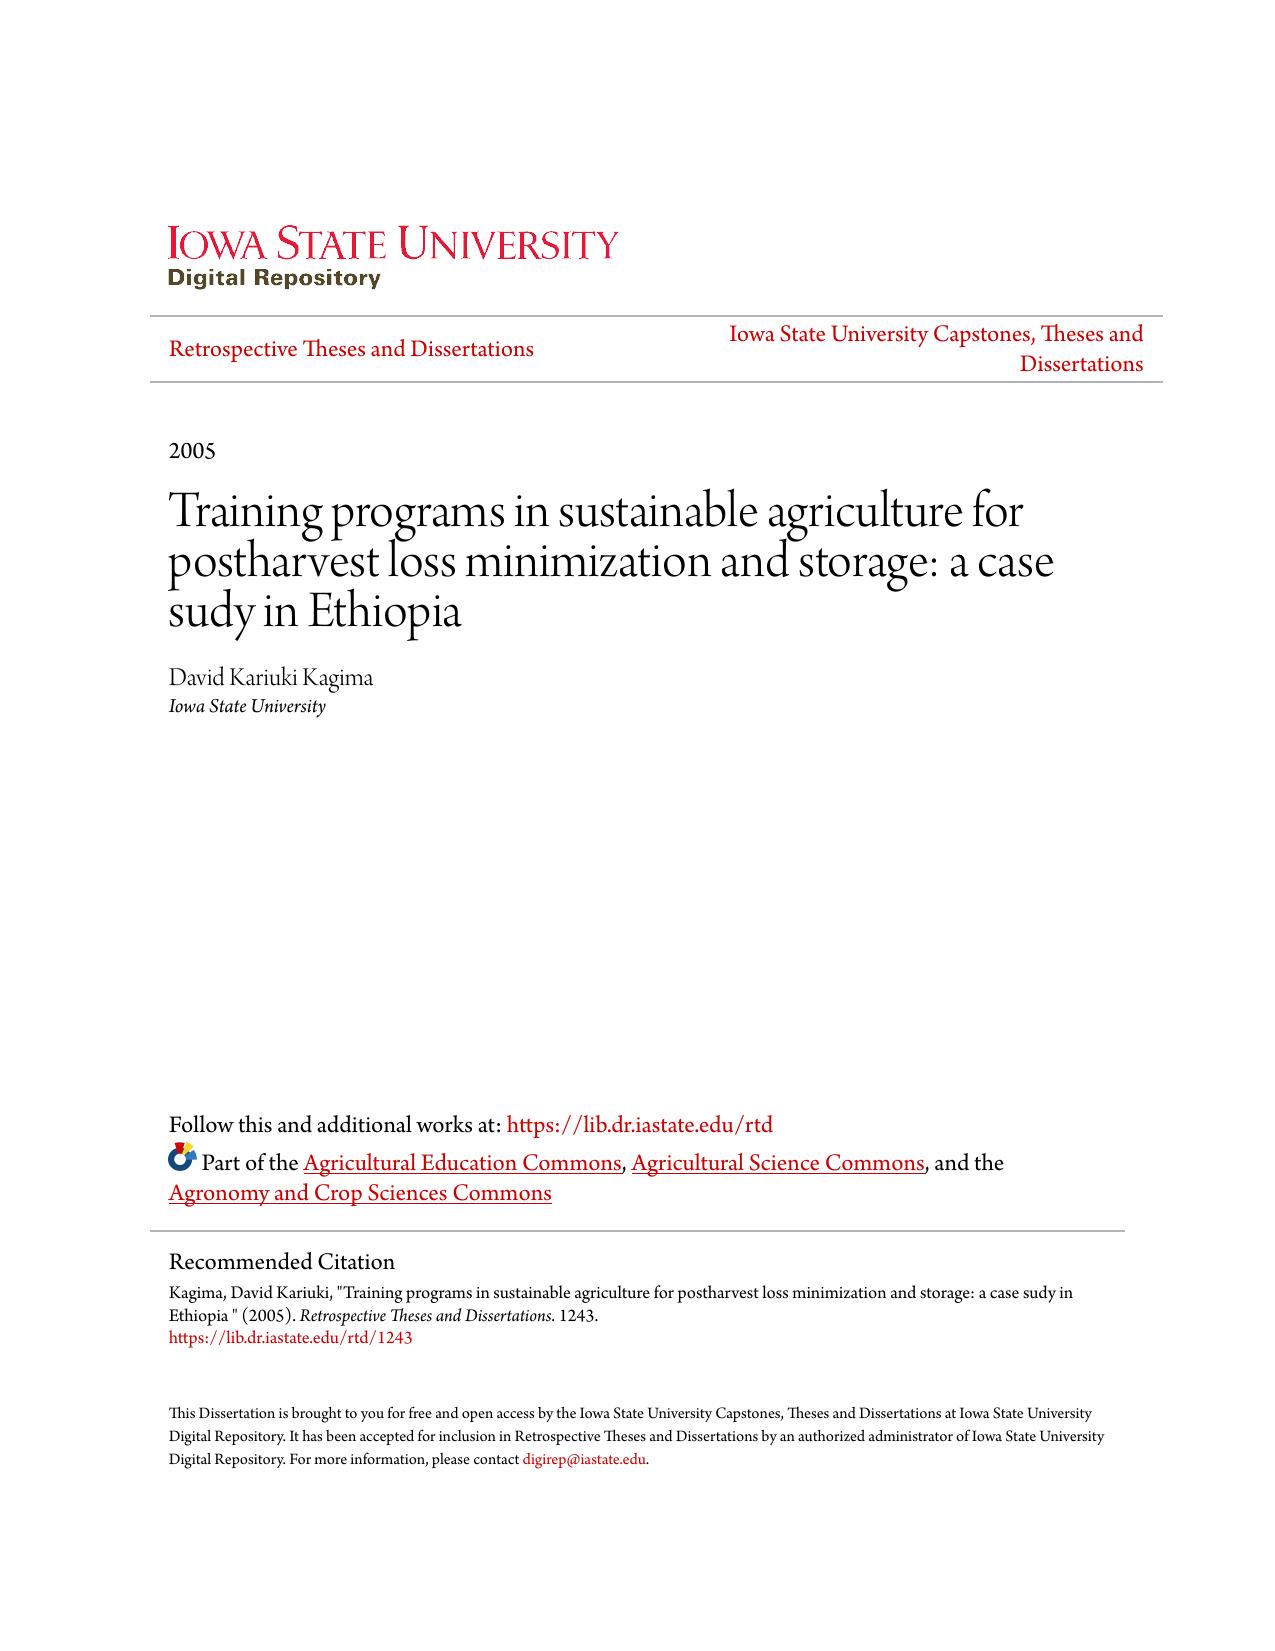 Training programs in sustainable agriculture for postharvest loss minimization and storage: a case sudy in Ethiopia